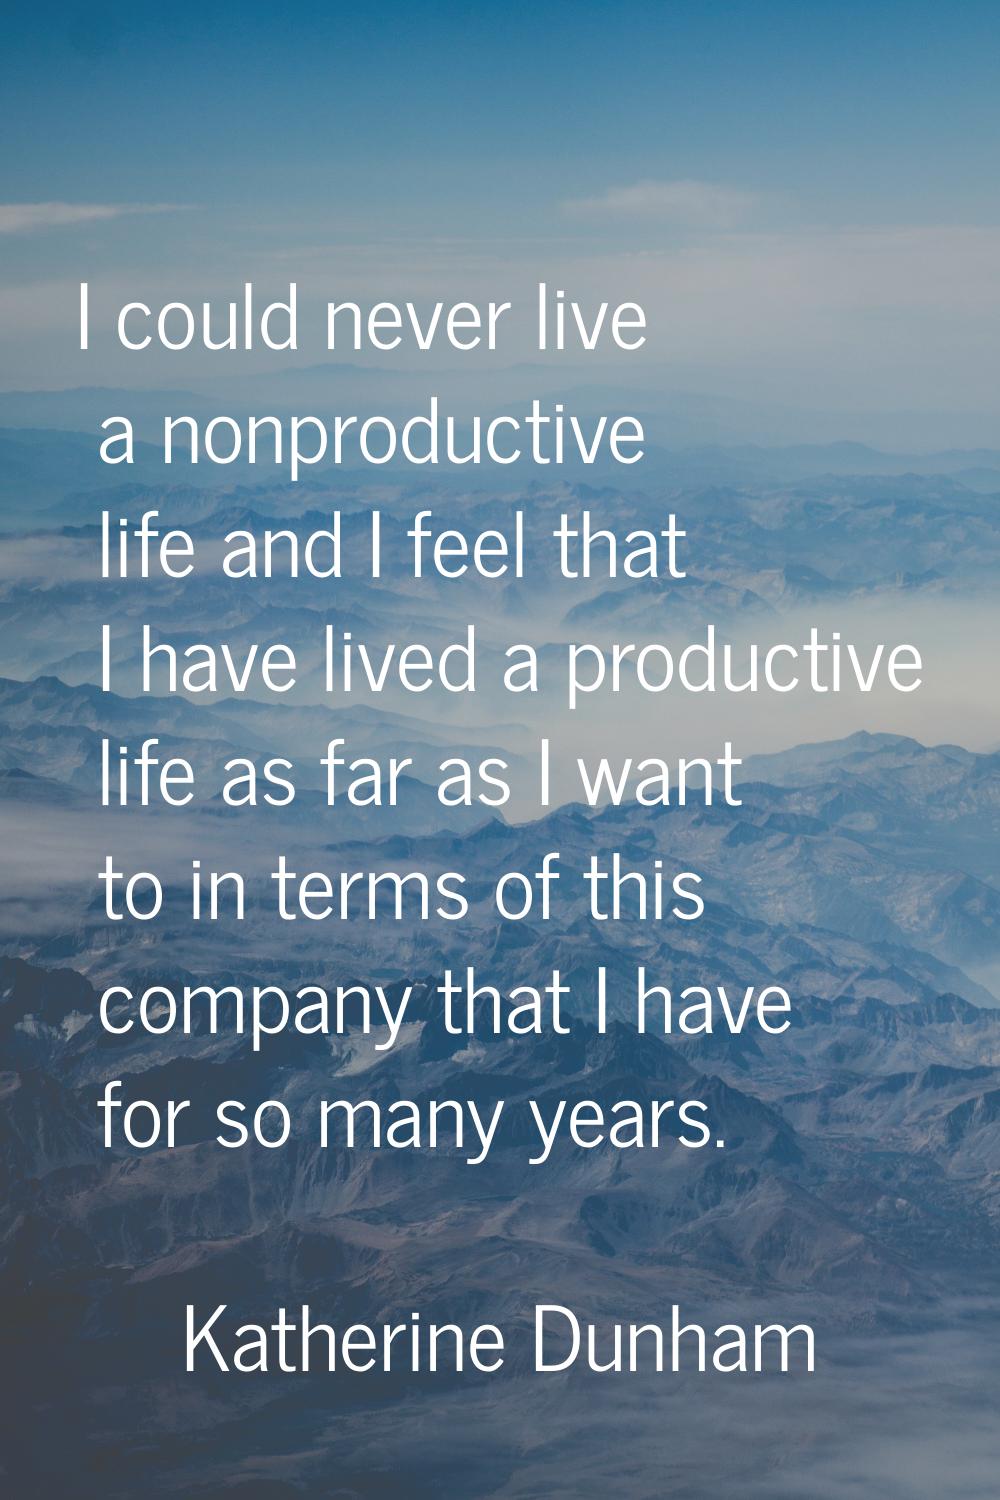 I could never live a nonproductive life and I feel that I have lived a productive life as far as I 